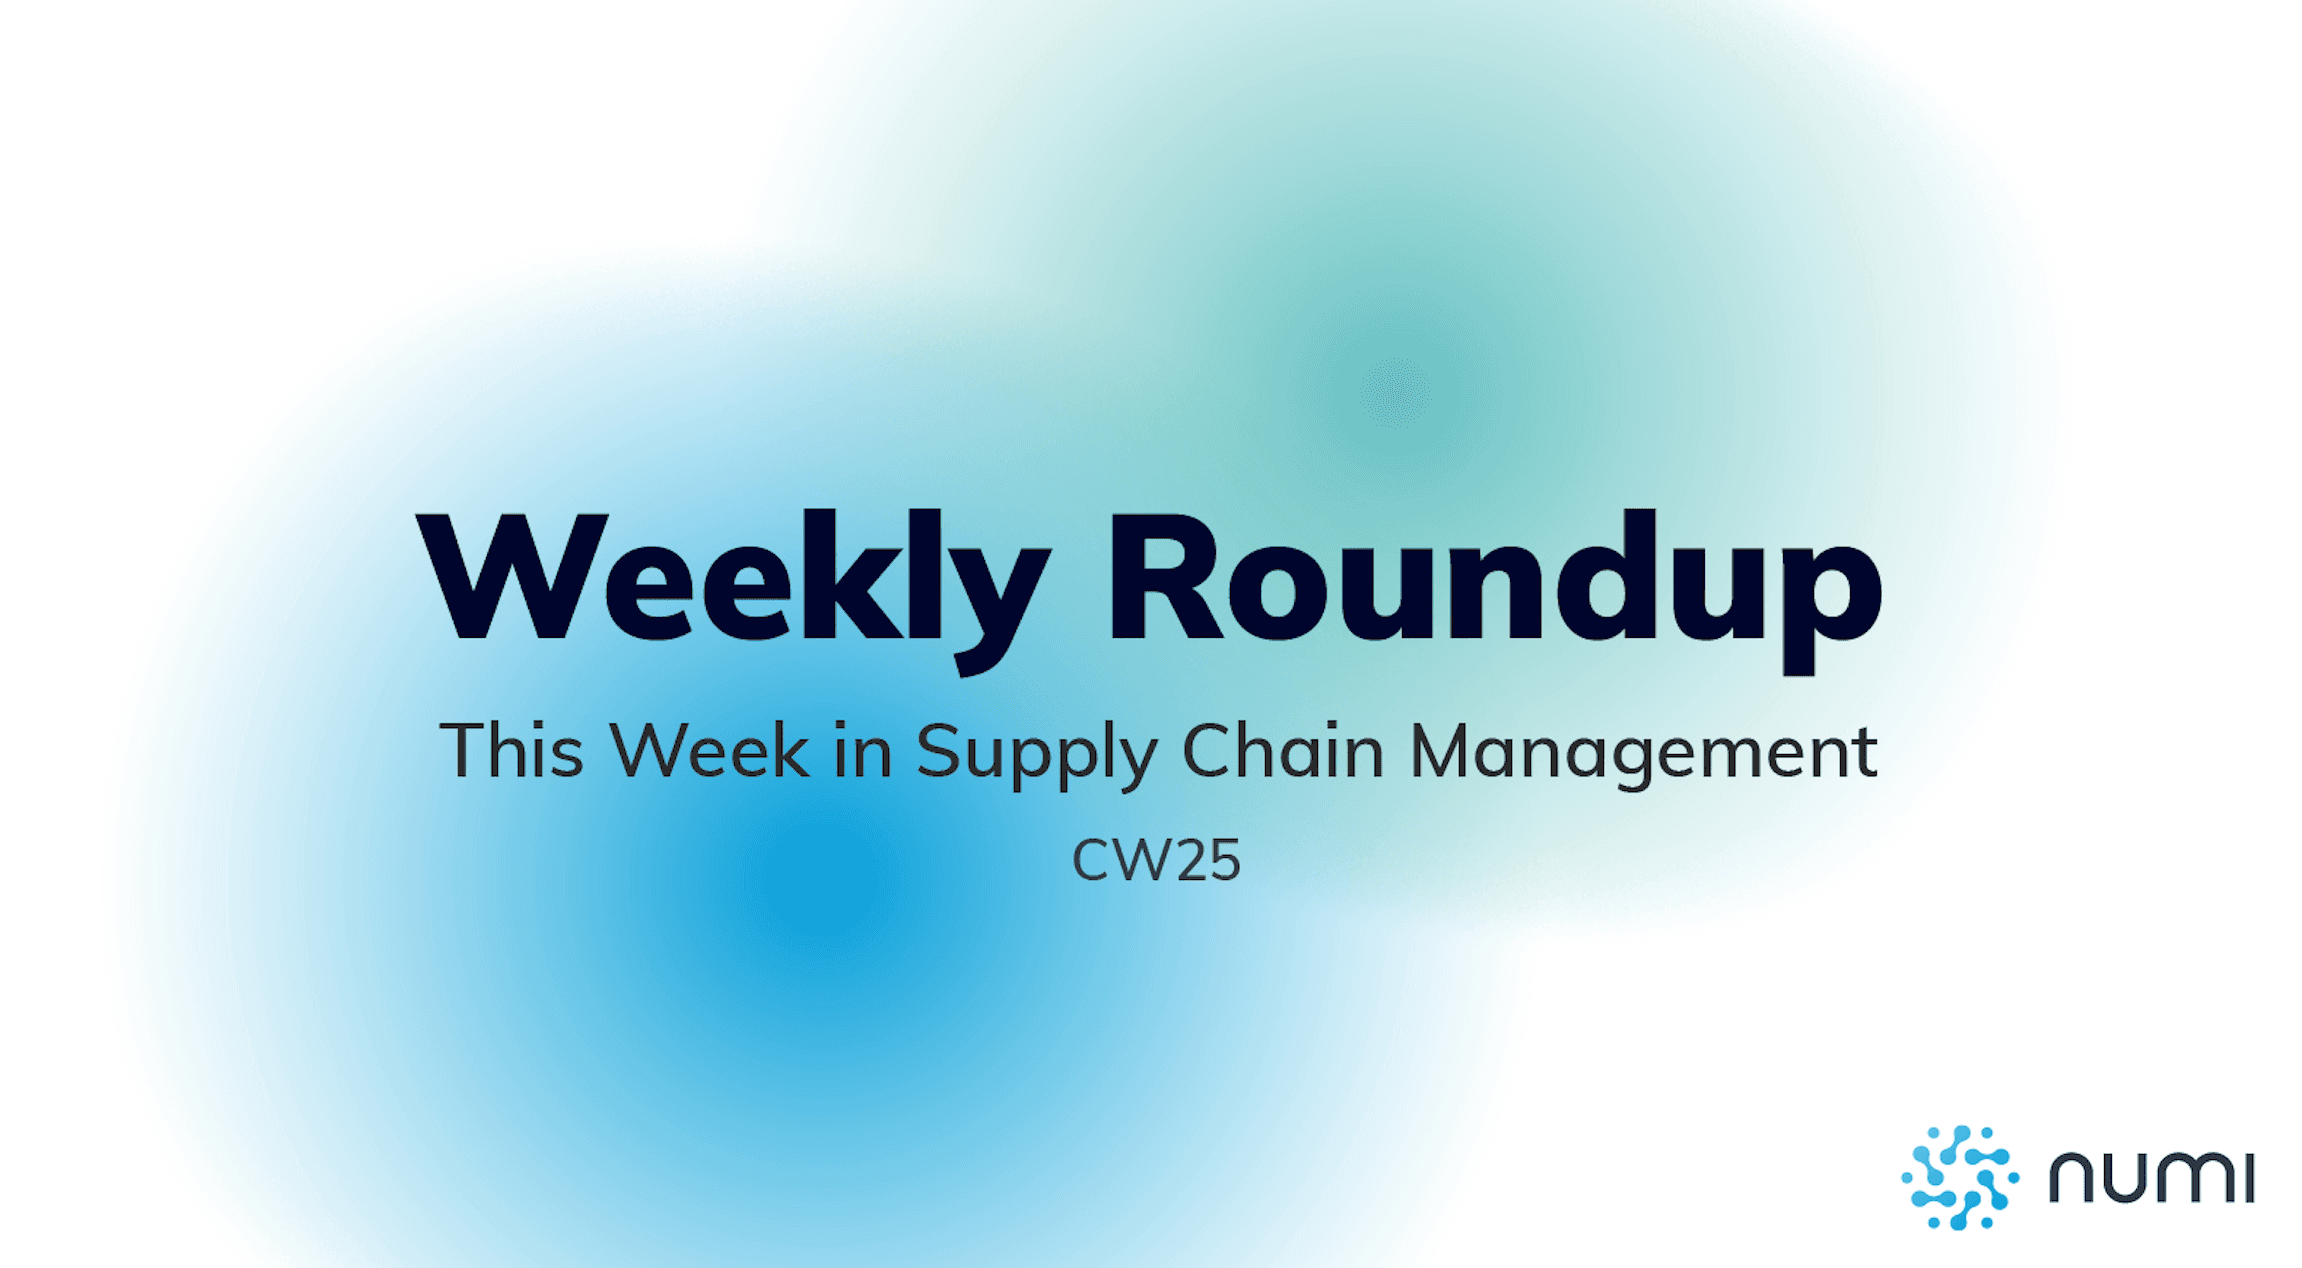 Weekly Roundup - Disruptions at German Ports, UNICEF Partnerships for Emergency Responses and REWE’s New Distribution Centre